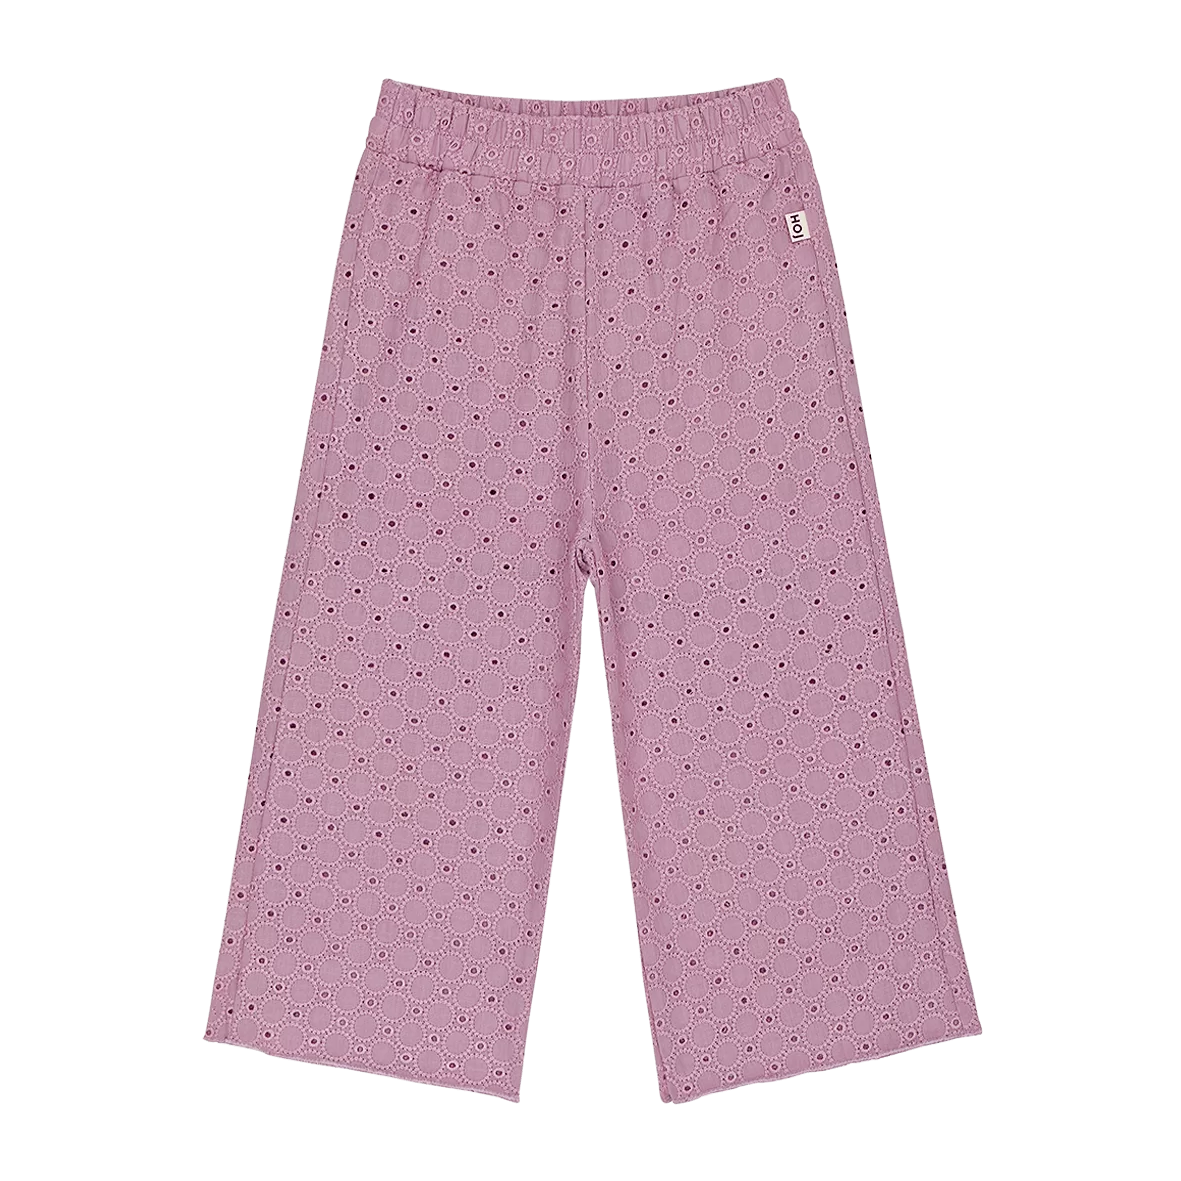 House of jamie - Broidery Culotte - Lavender